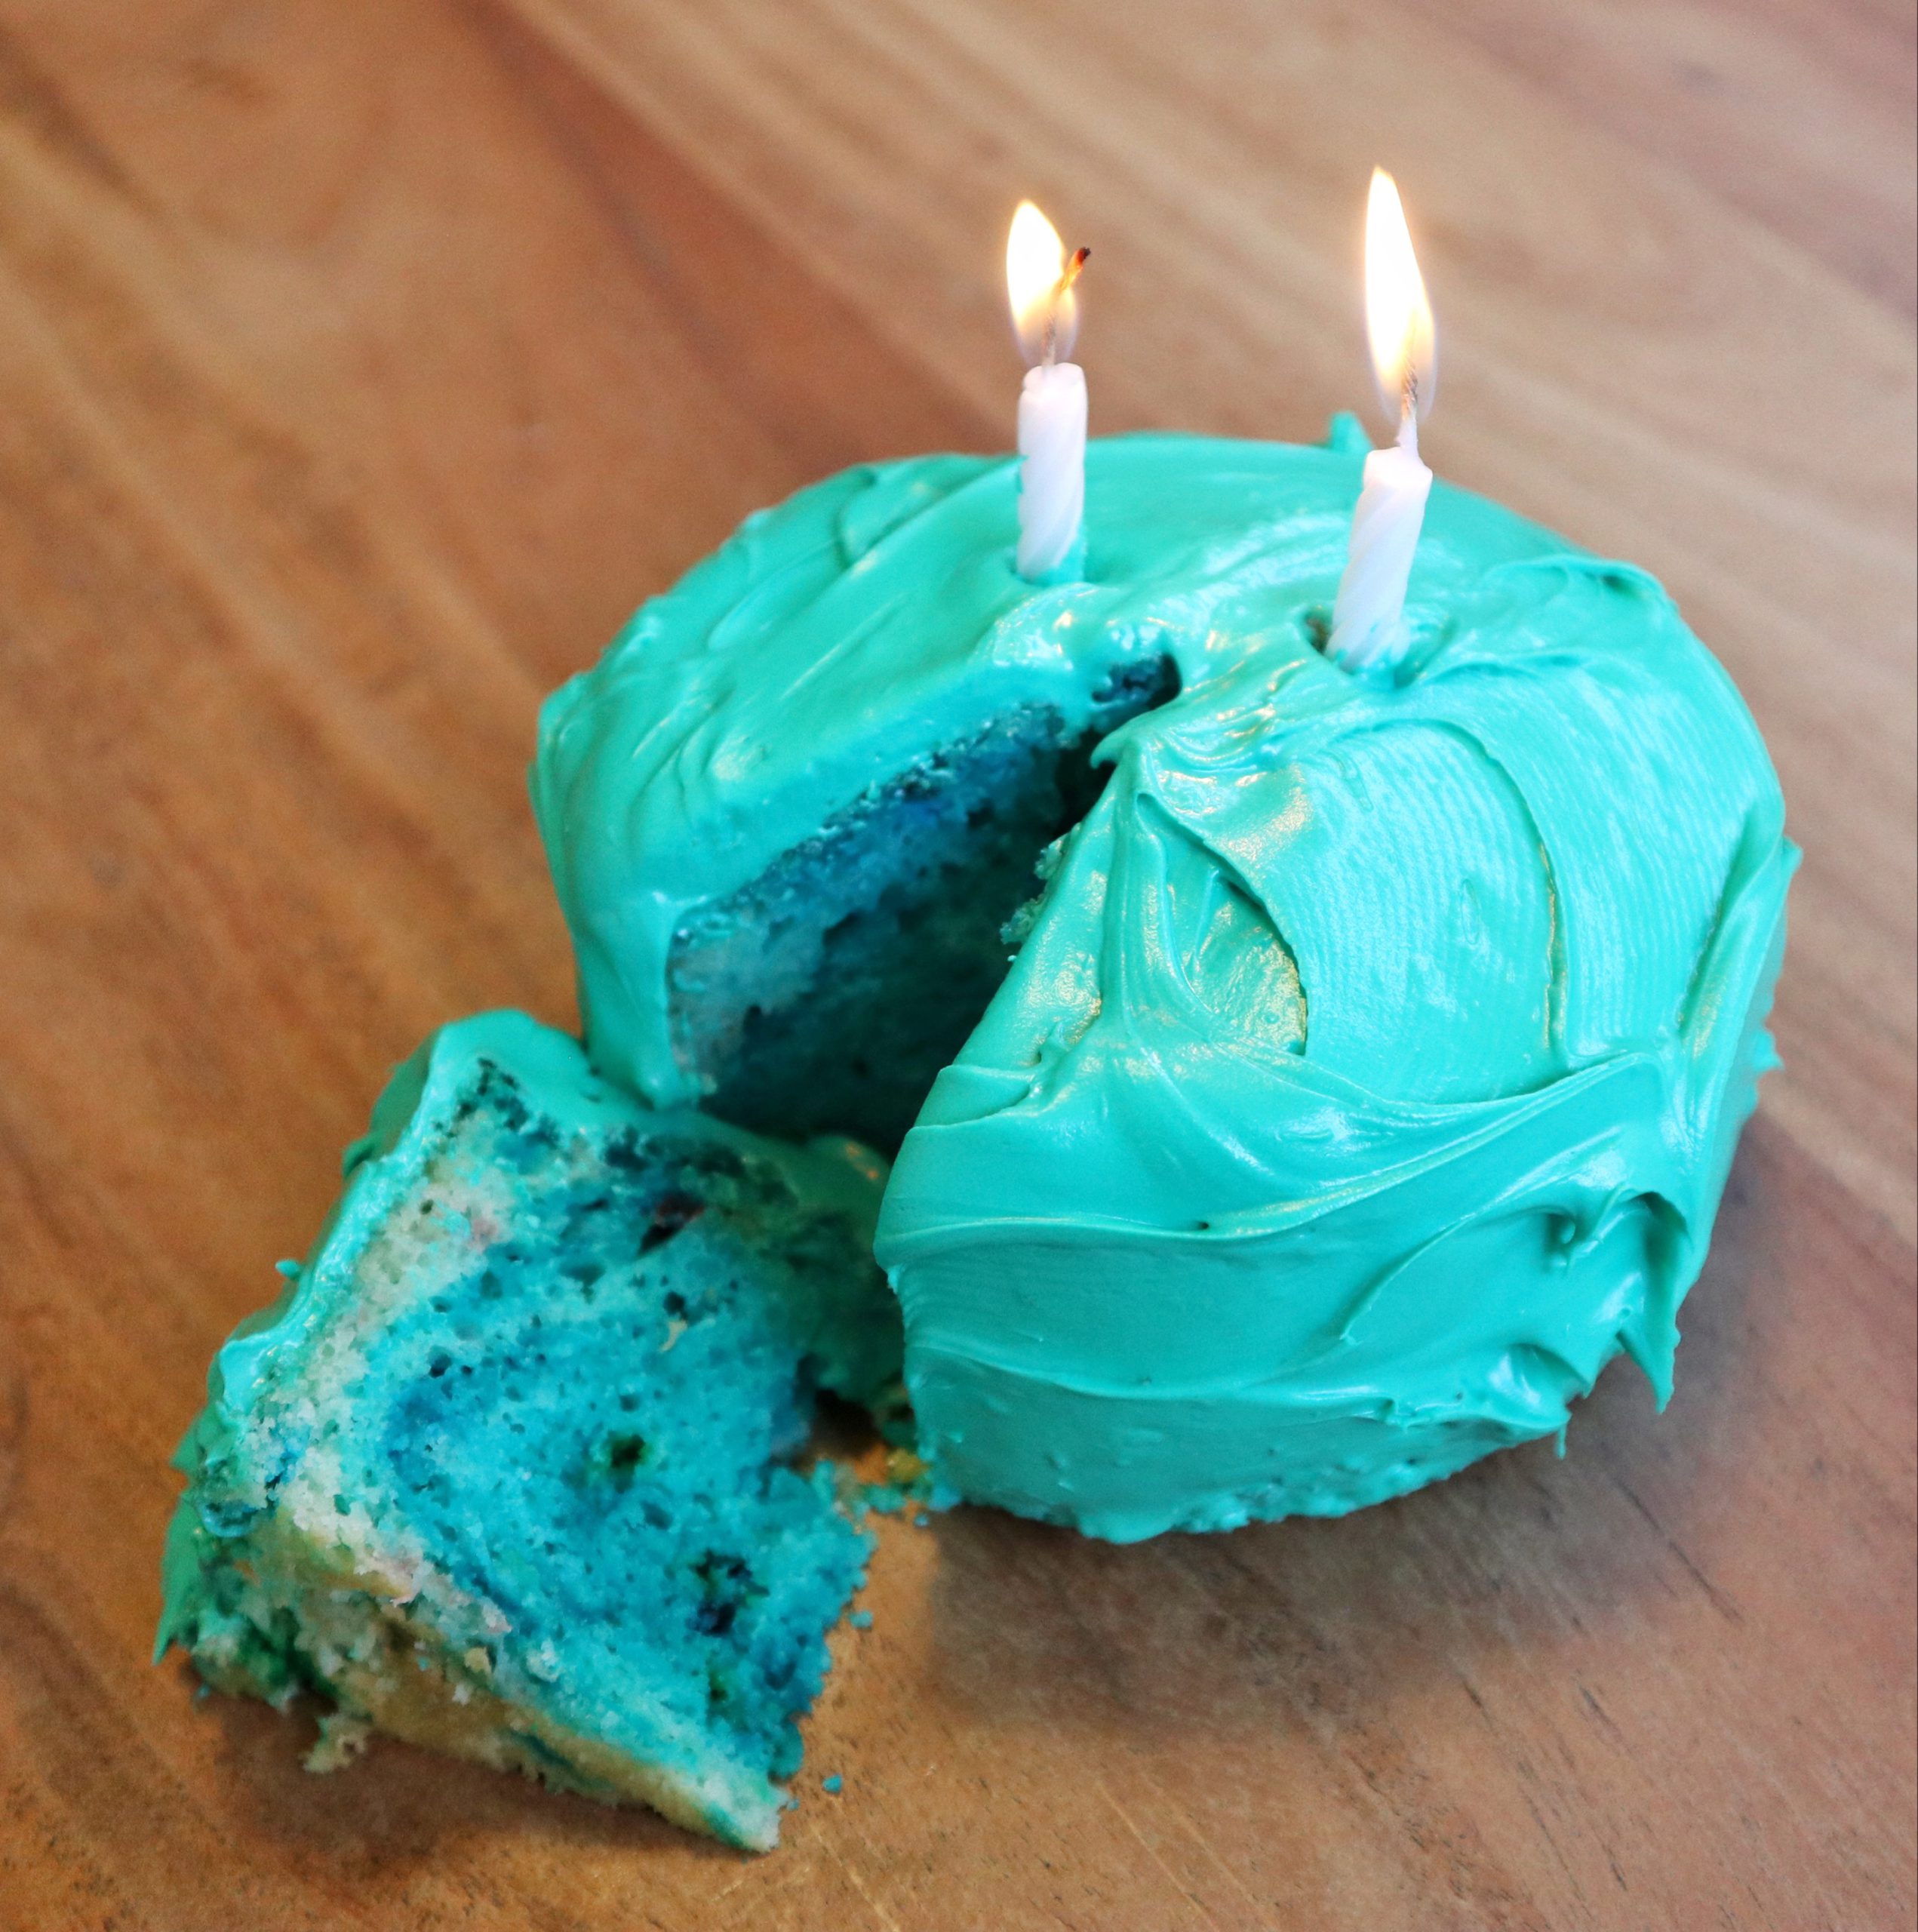 A cake frosted in Truveta teal, with two candles.